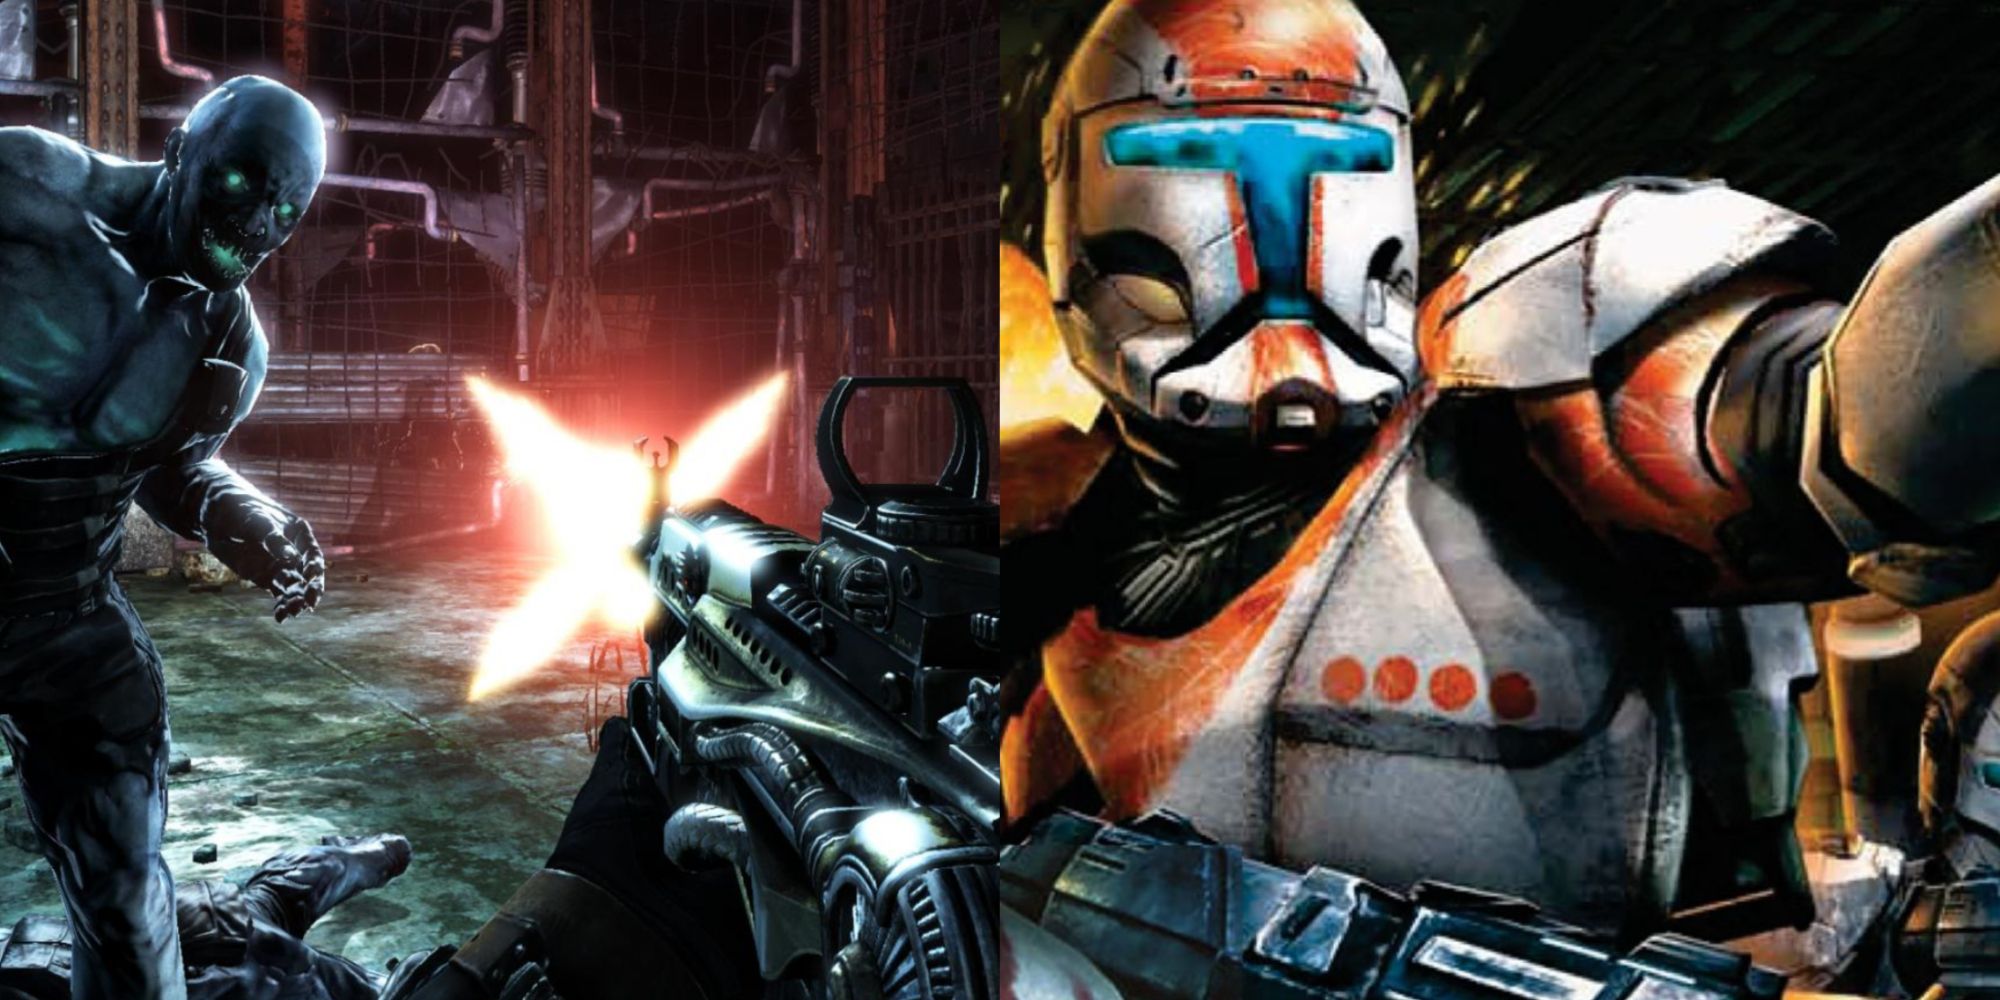 Best FPS Games Without Sequels Featured Split Image Singularity and Republic Commando